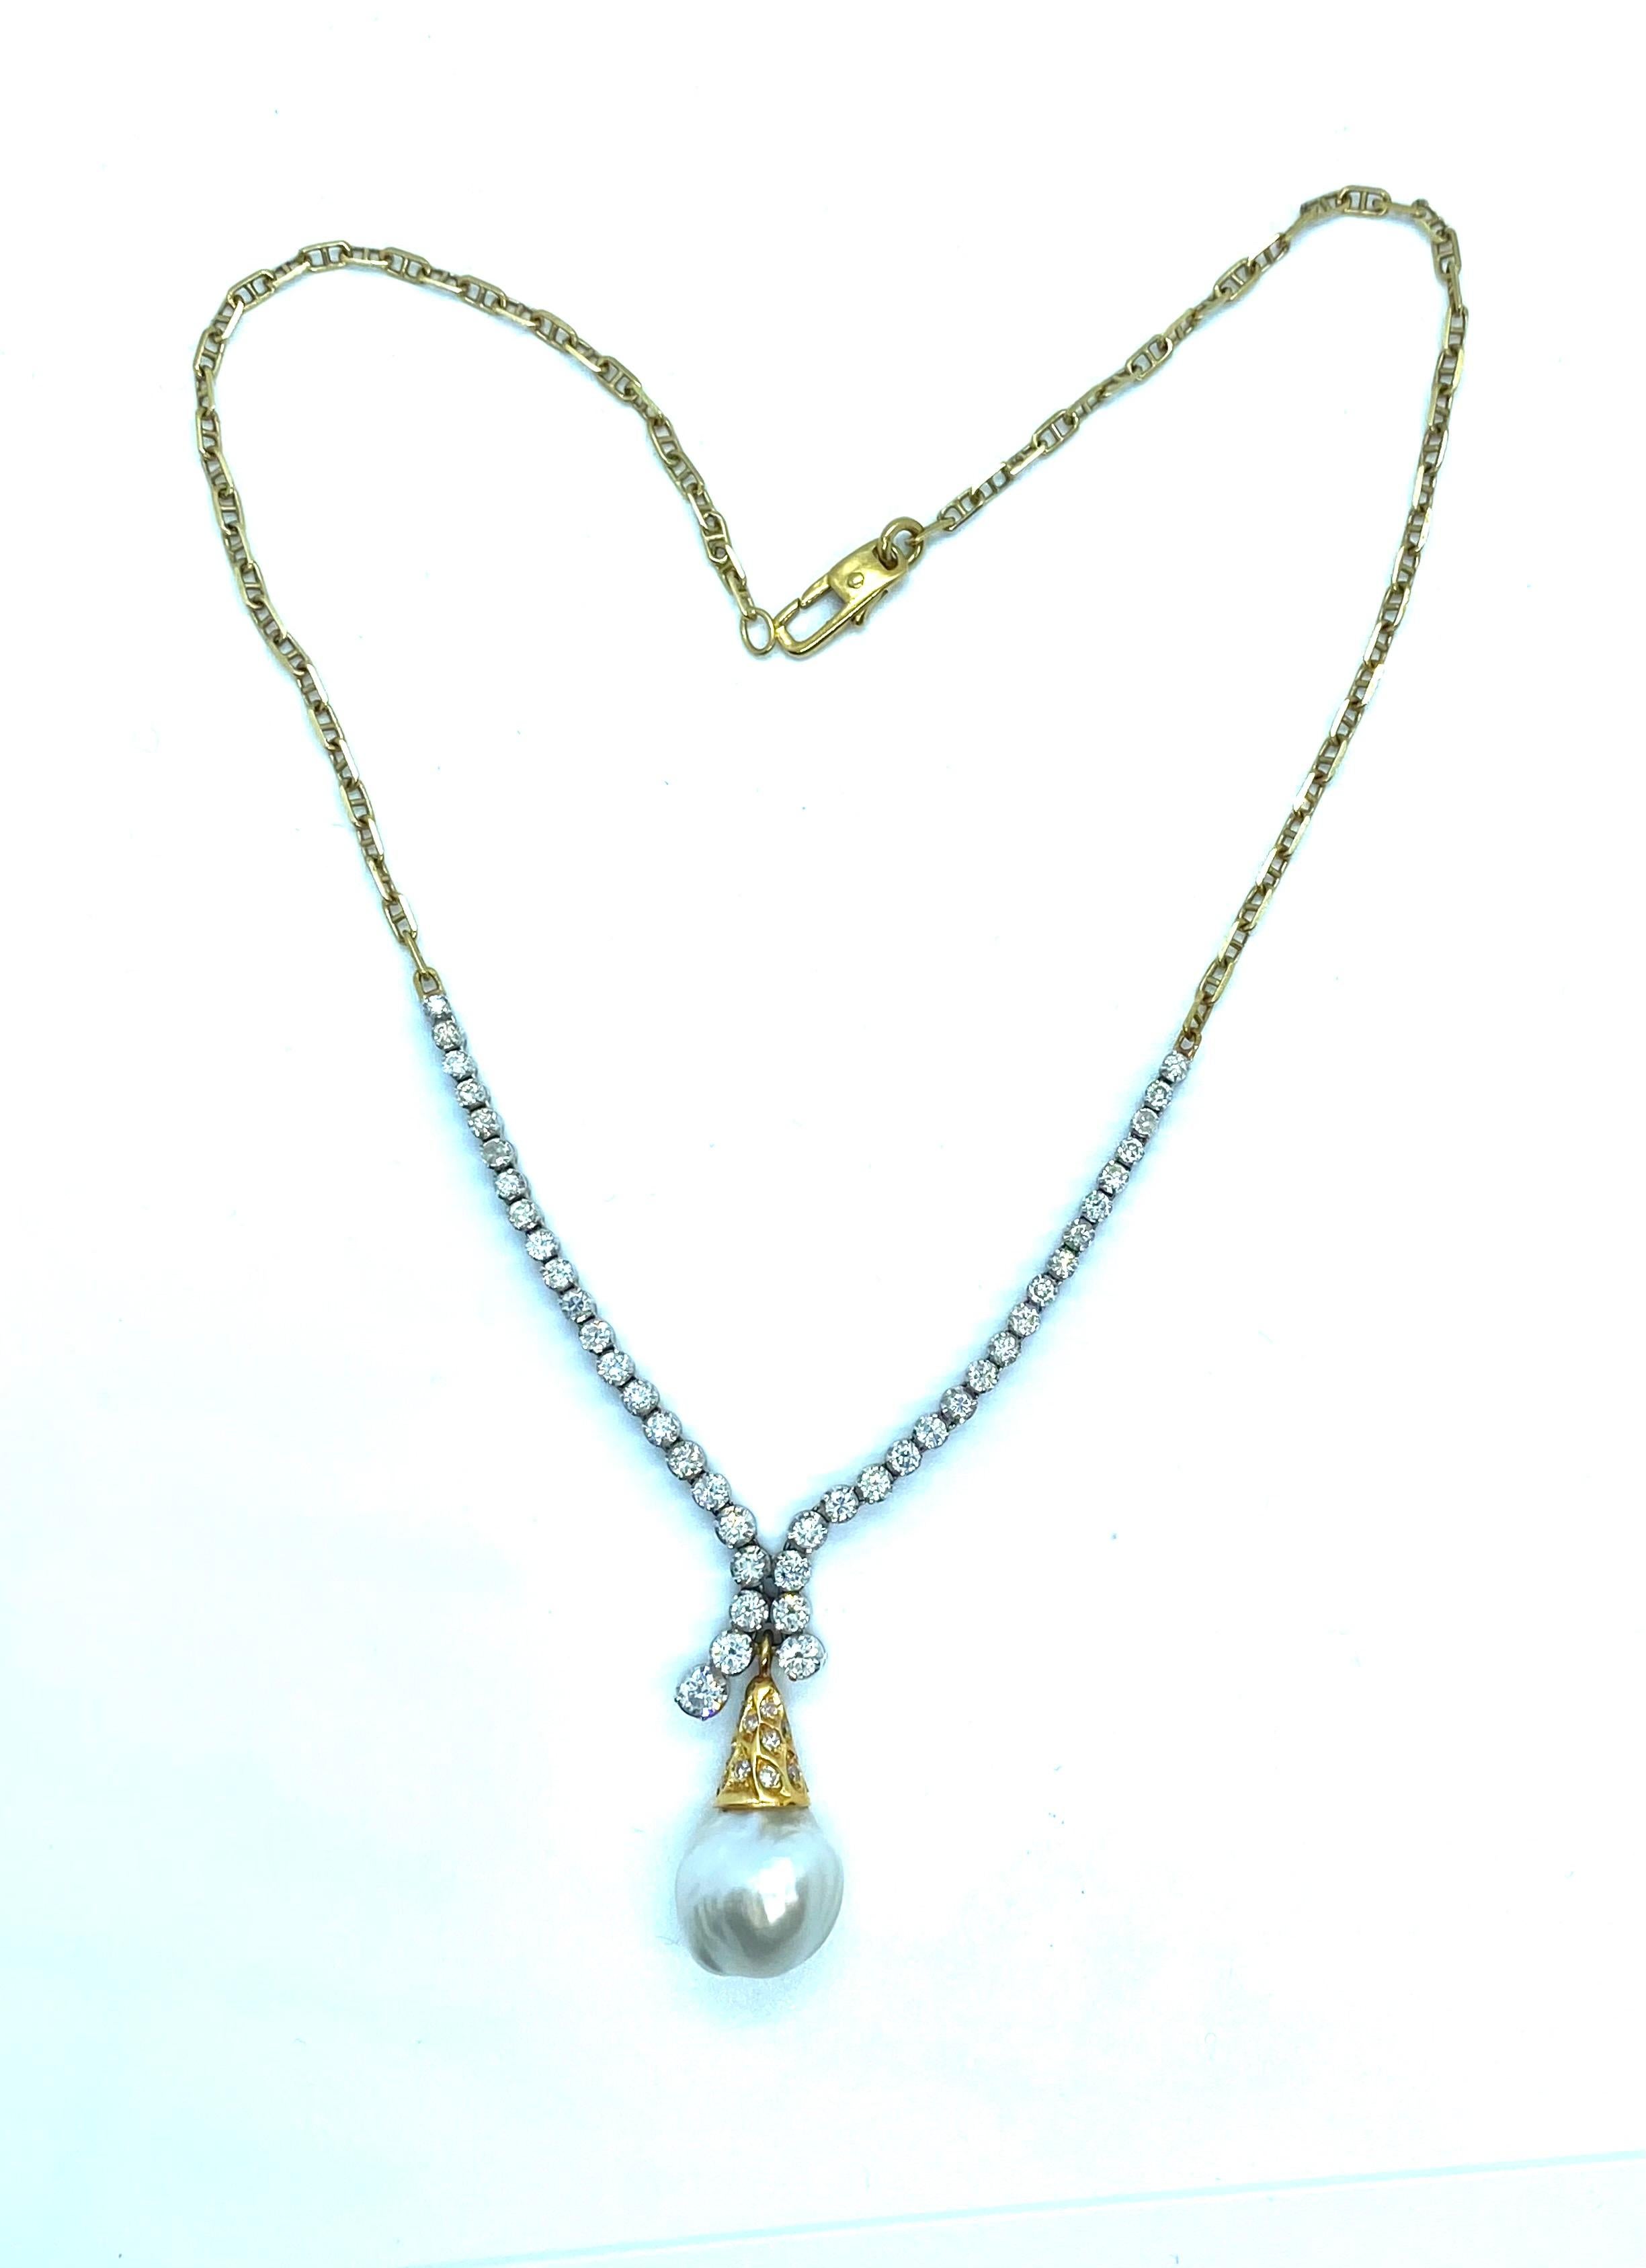 Exceptional twin-set composed of necklace and hanging earrings in yellow and white gold, bearing natural diamonds and baroque pearls.
The collier has a length, as a whole, of 45 cm.
It bears diamonds for ct. 2.60 overall and the pearl has a diameter